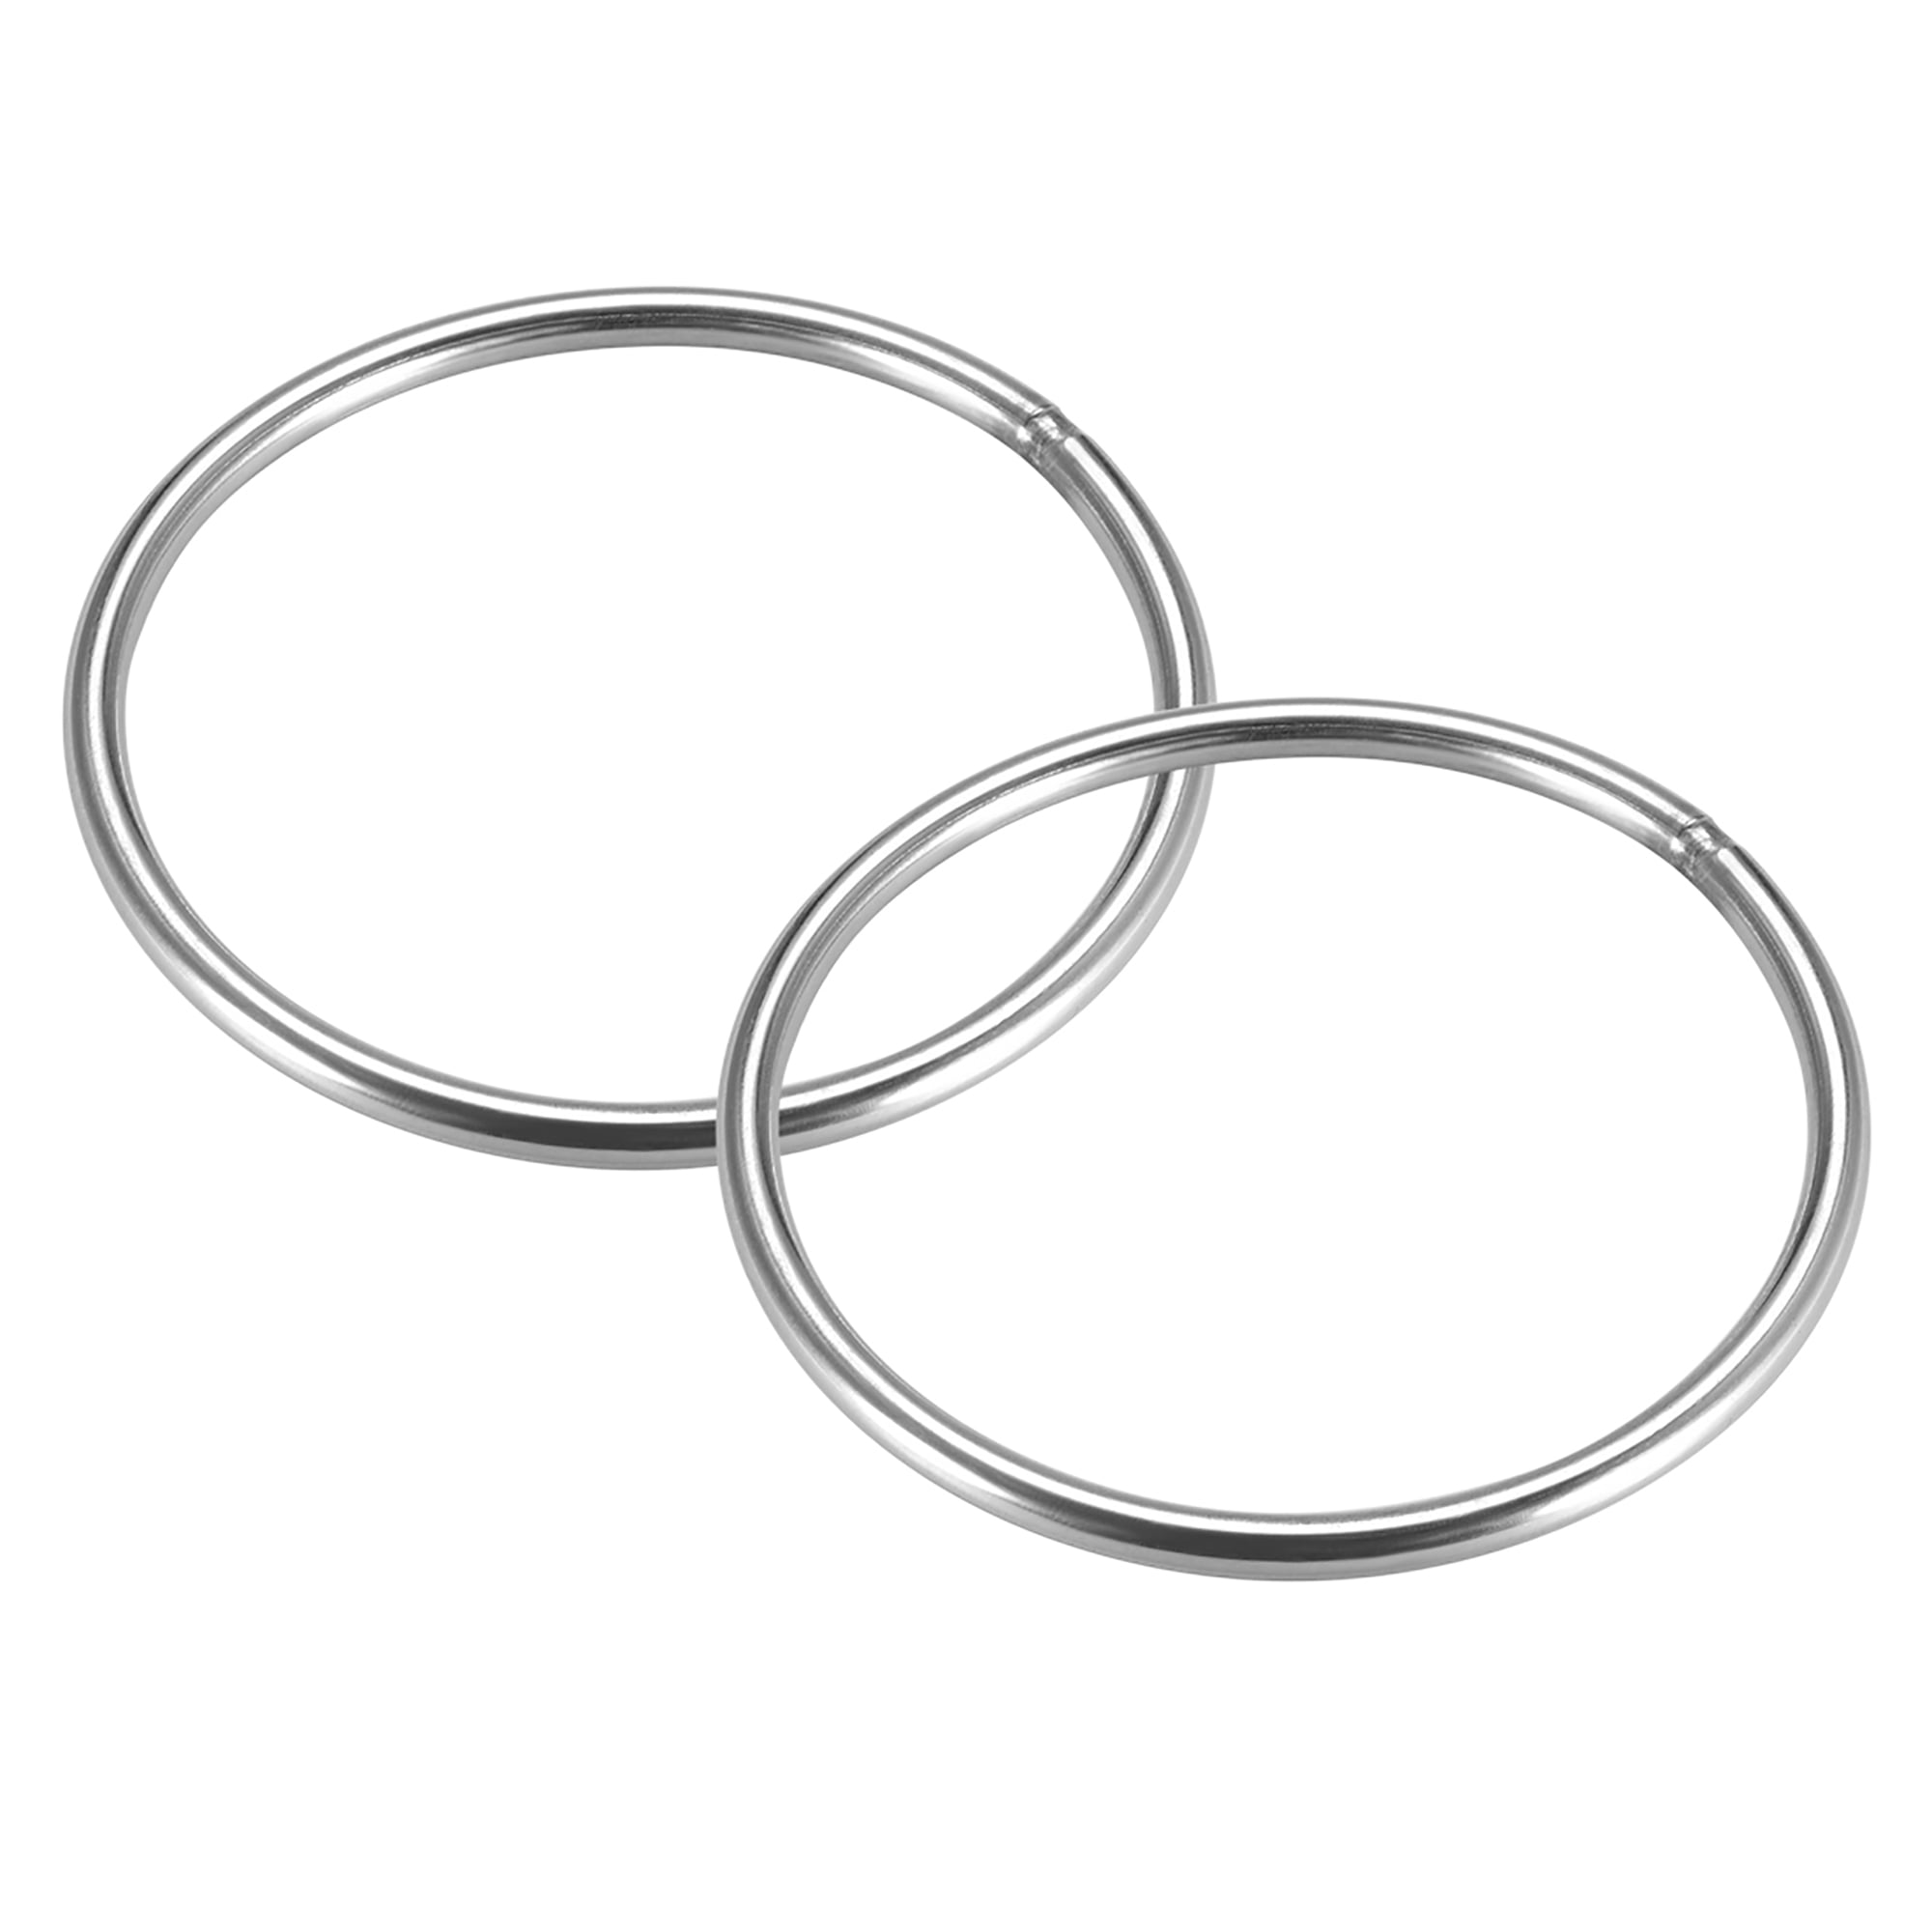 Welded O Ring, 100 x 5mm Strapping Round Rings Stainless Steel 2pcs ...